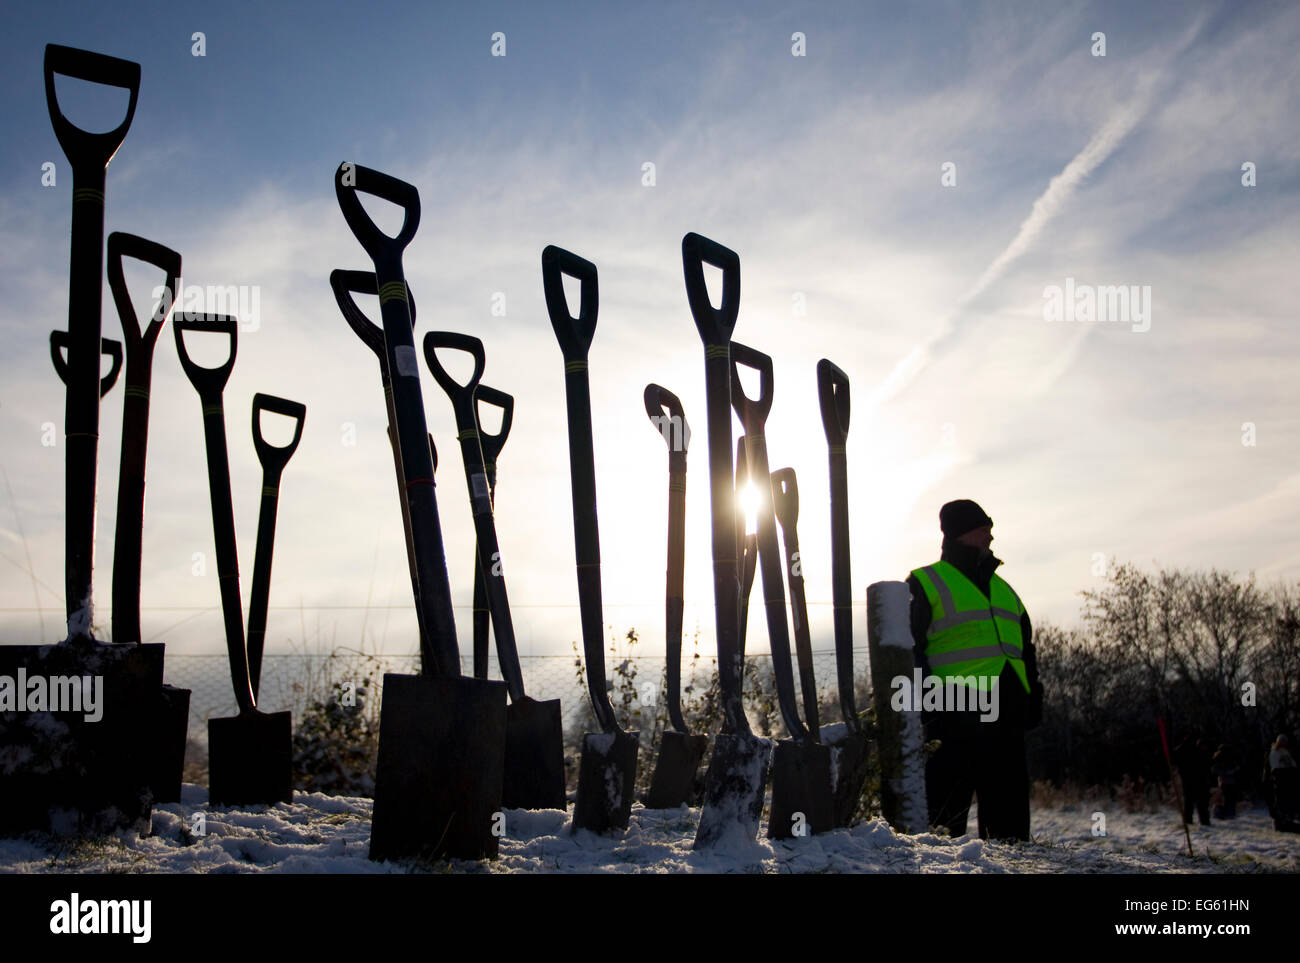 Man standing next to a group of spades stuck in the ground, part of The National Forest planting day, Moira, Derbyshire, England, UK, November 2010. 2020VISION Book Plate. Did you know? In 2013-2014, 149 hectares were added to the National Forest. Stock Photo